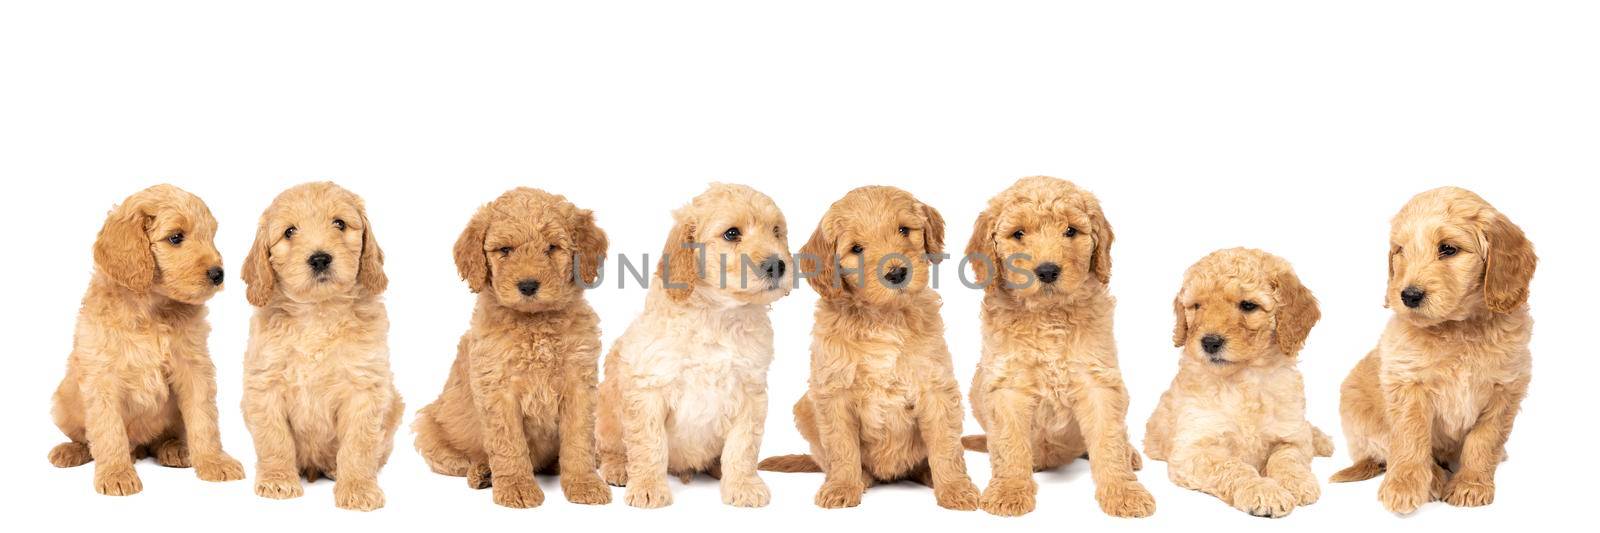 A litter of cute labradoodle puppies sitting looking at the camera isolated on a white background with space for text by LeoniekvanderVliet